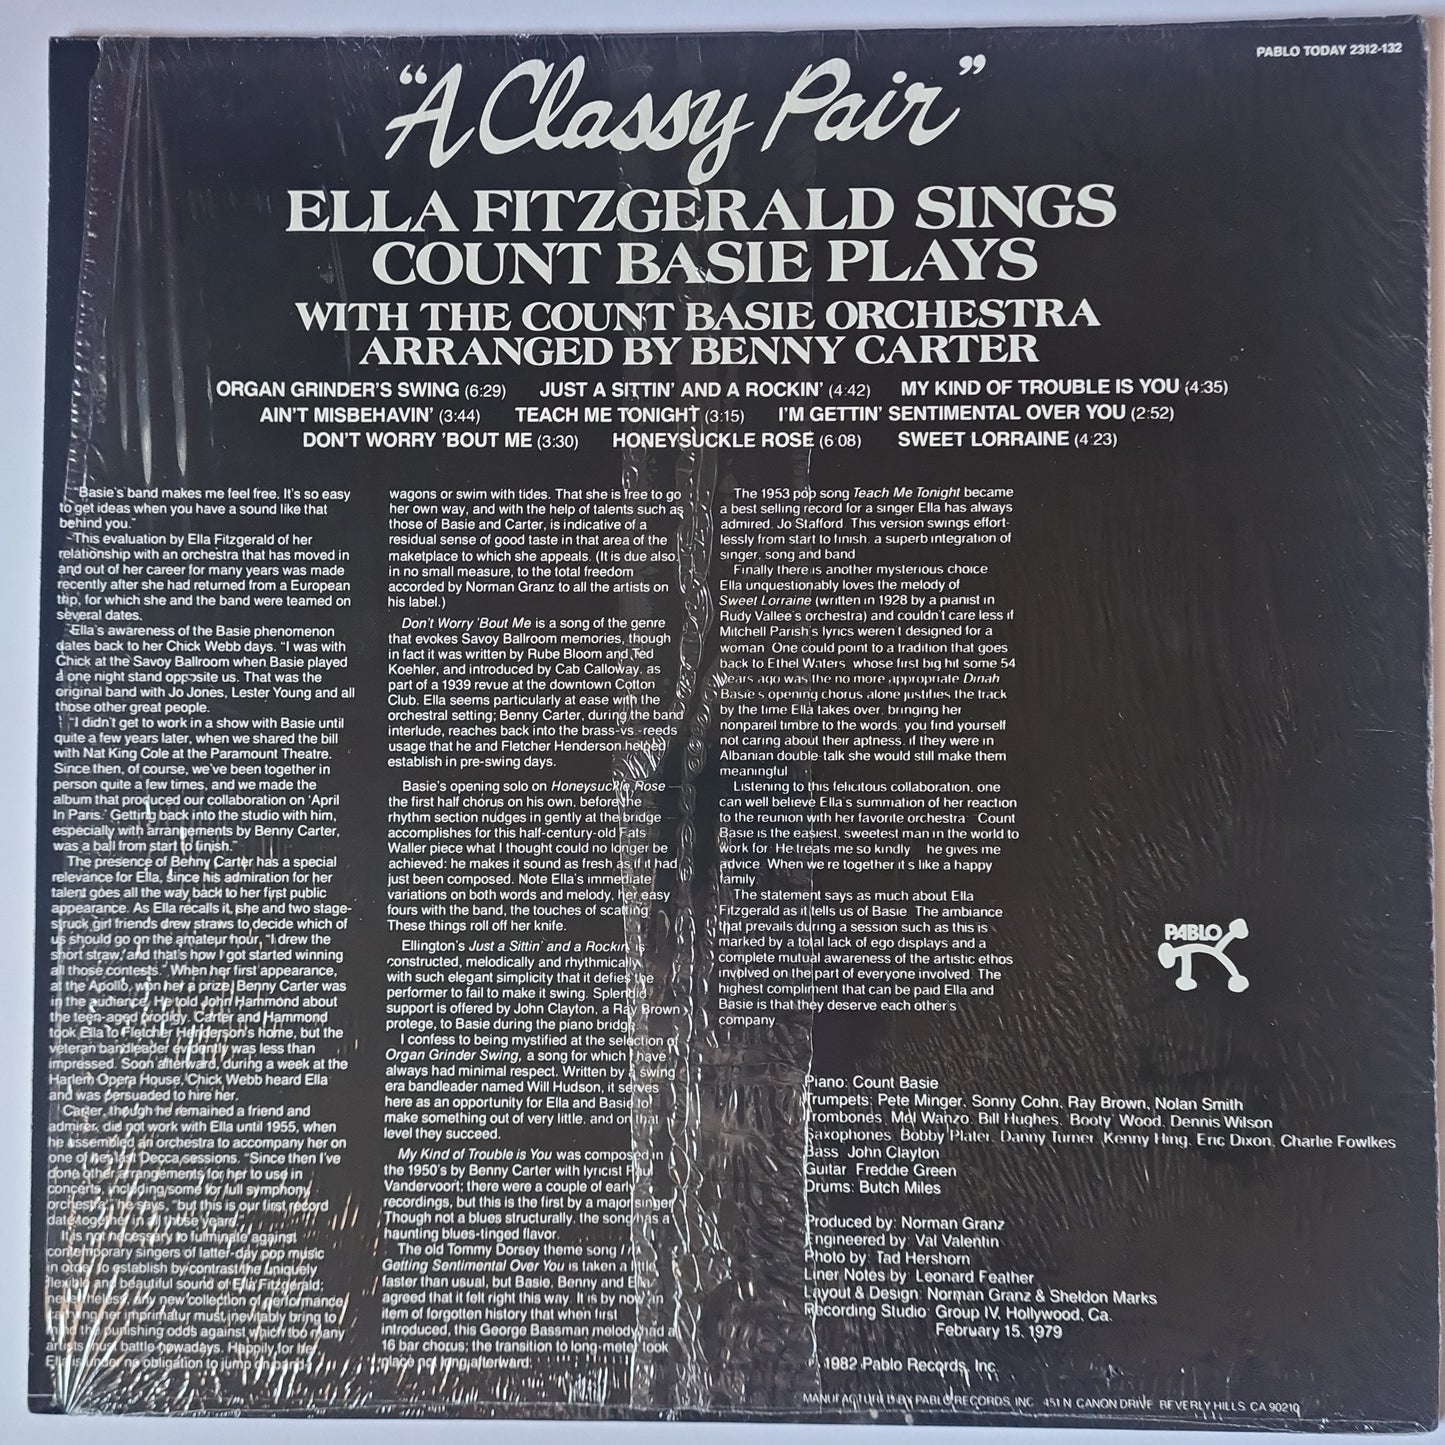 Ella Fitzgerald Sings Count Basie Plays With The Count Basie Orchestra – A Classy Pair - 1982 Pressing - Vinyl Record